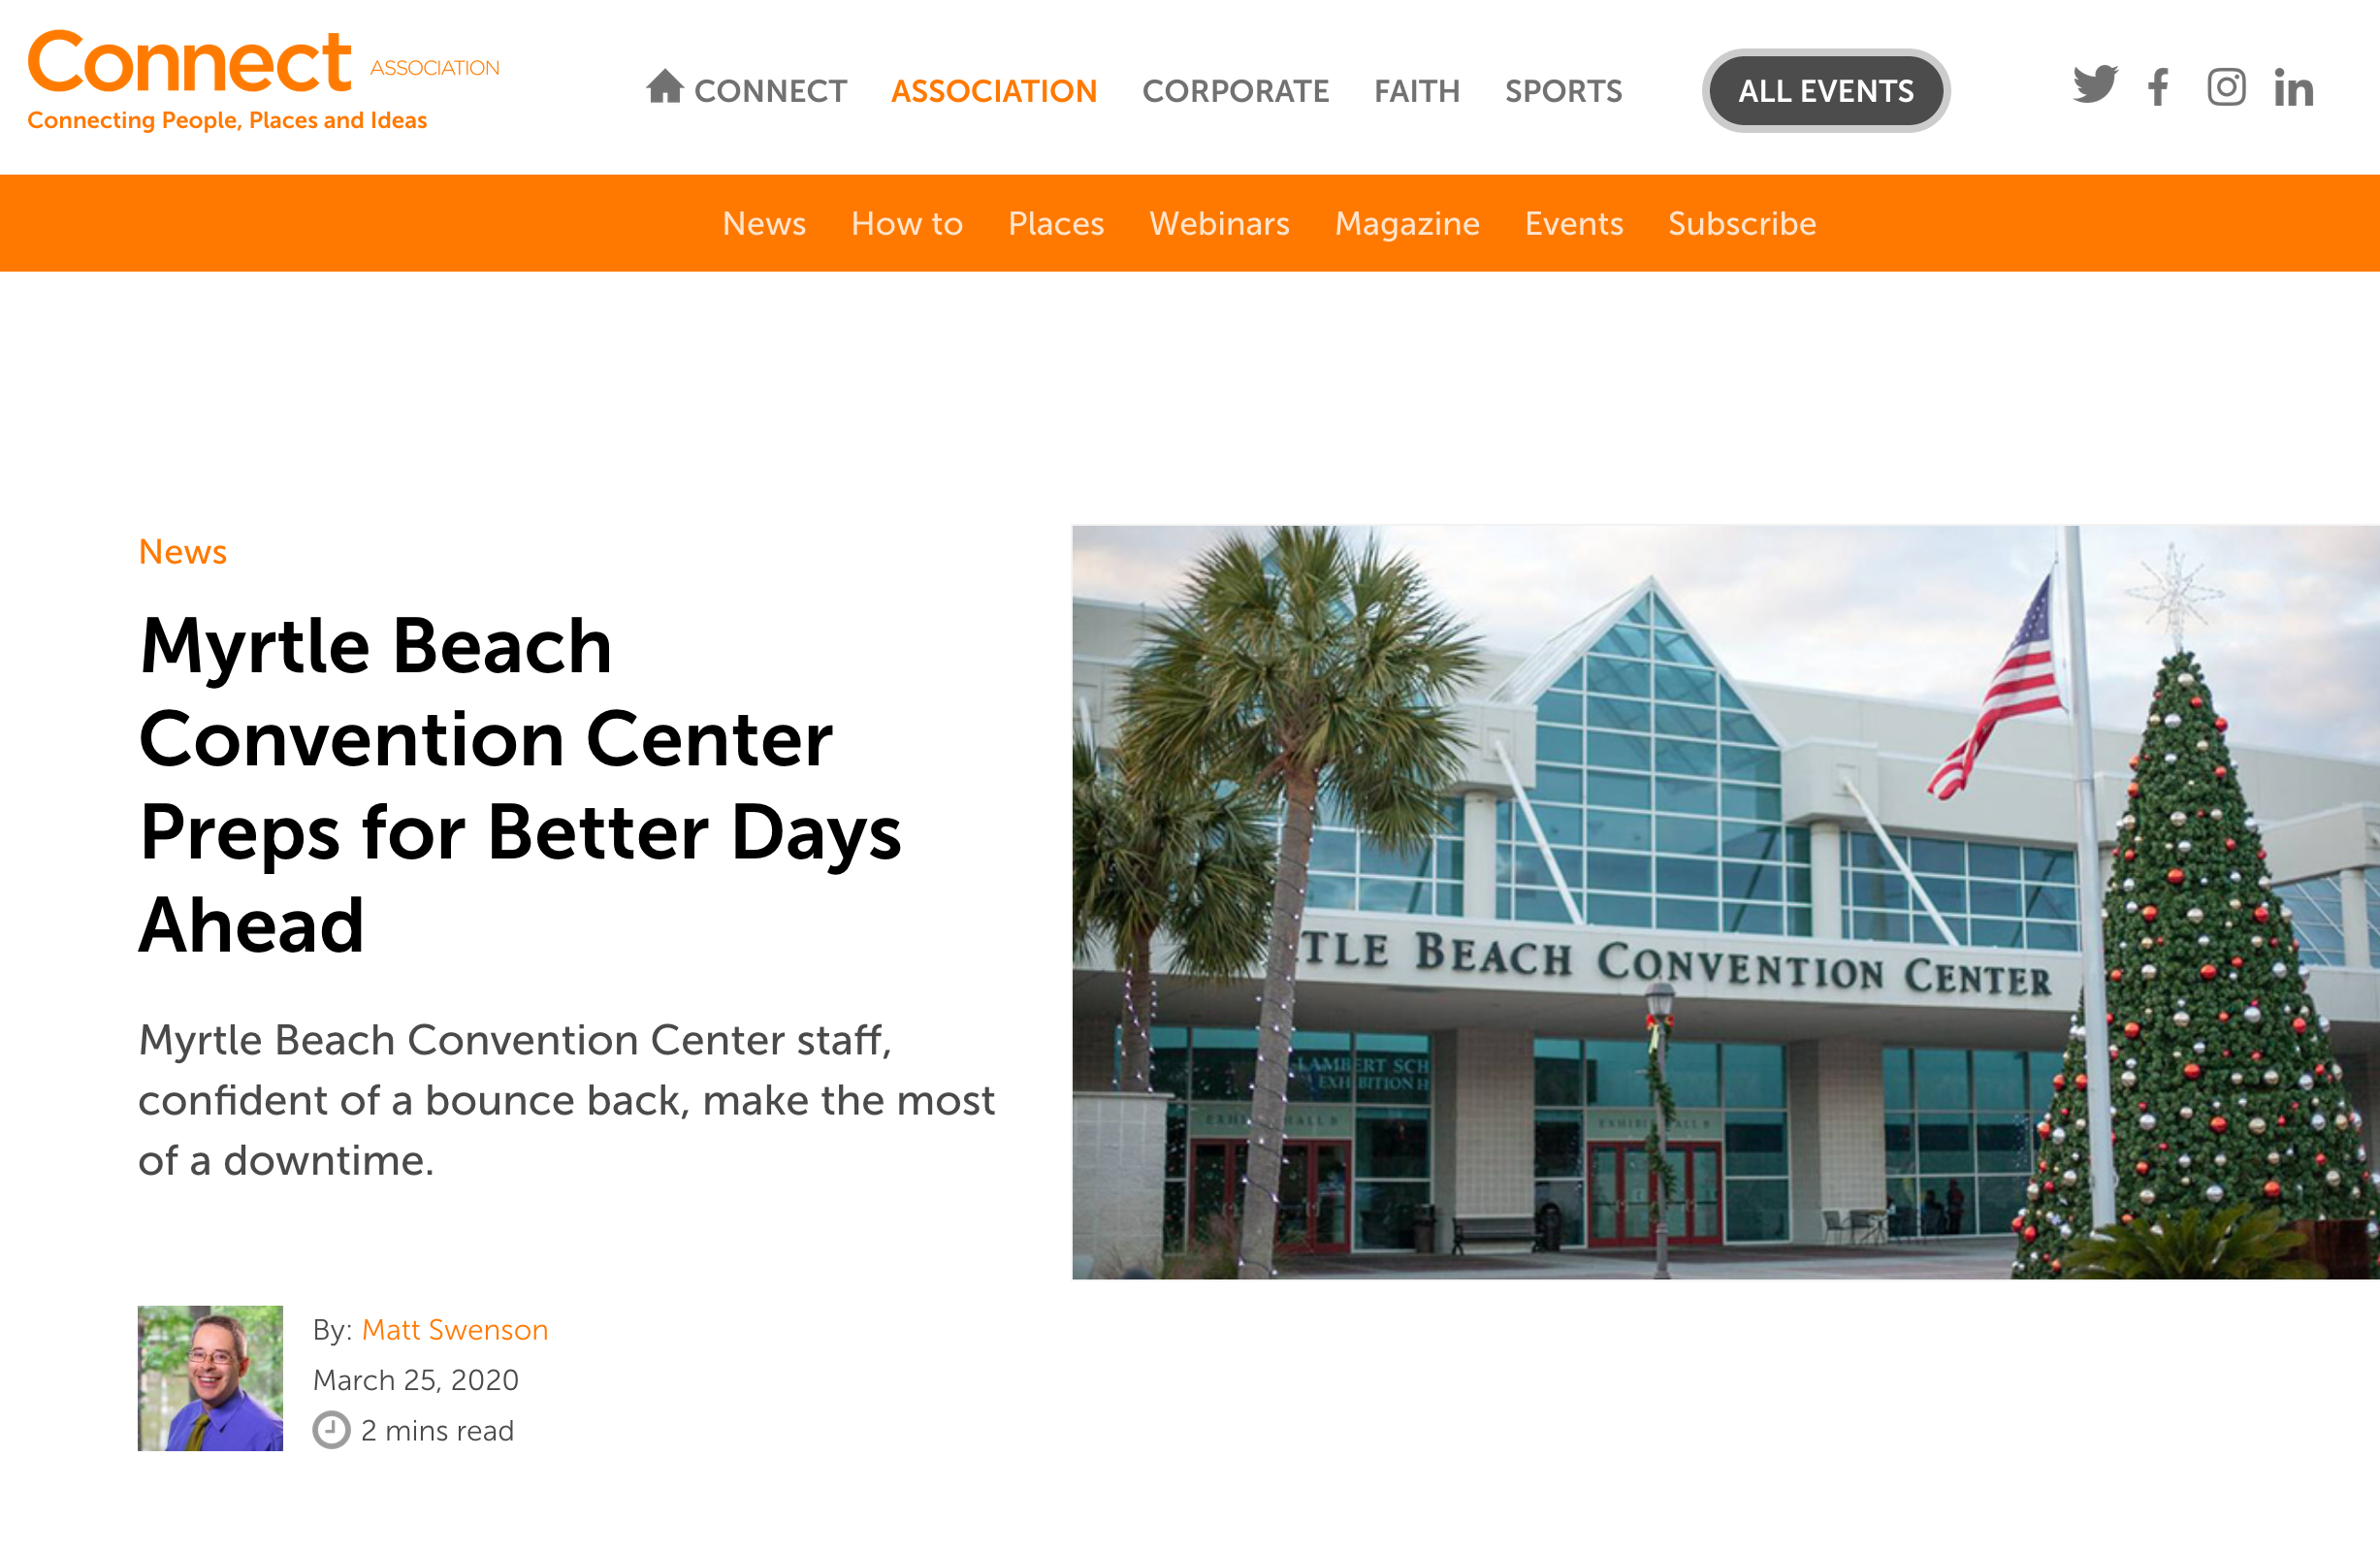 Myrtle Beach Convention Center Preps for Better Days Ahead